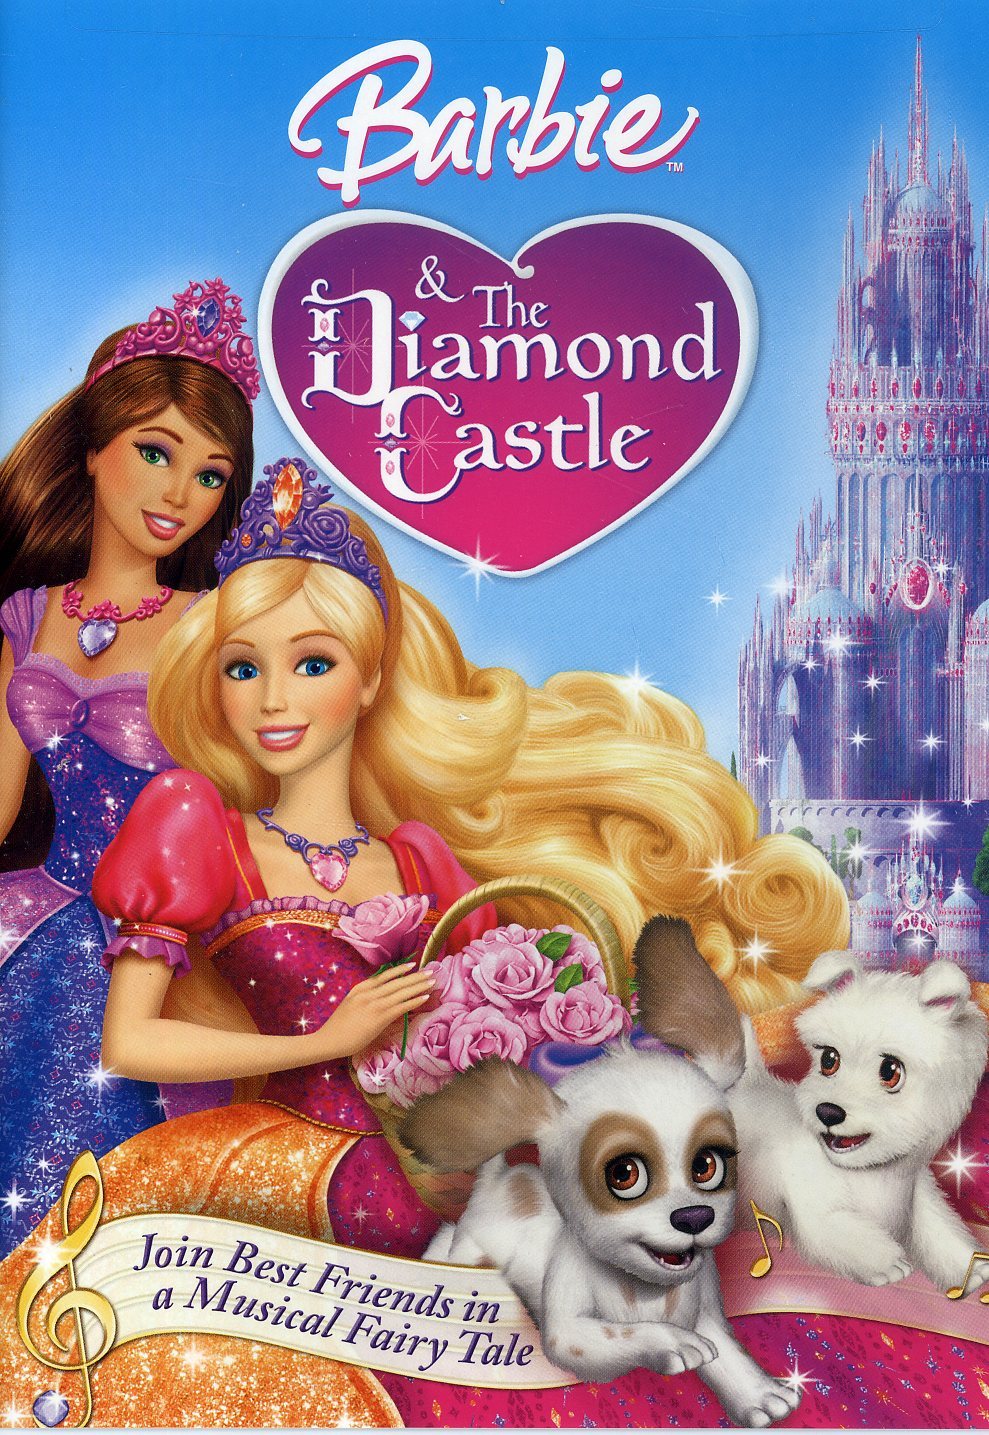 Favorite Barbie DVD Cover Countdown Round 16 - Pick your least favorite (Click to see full image ...